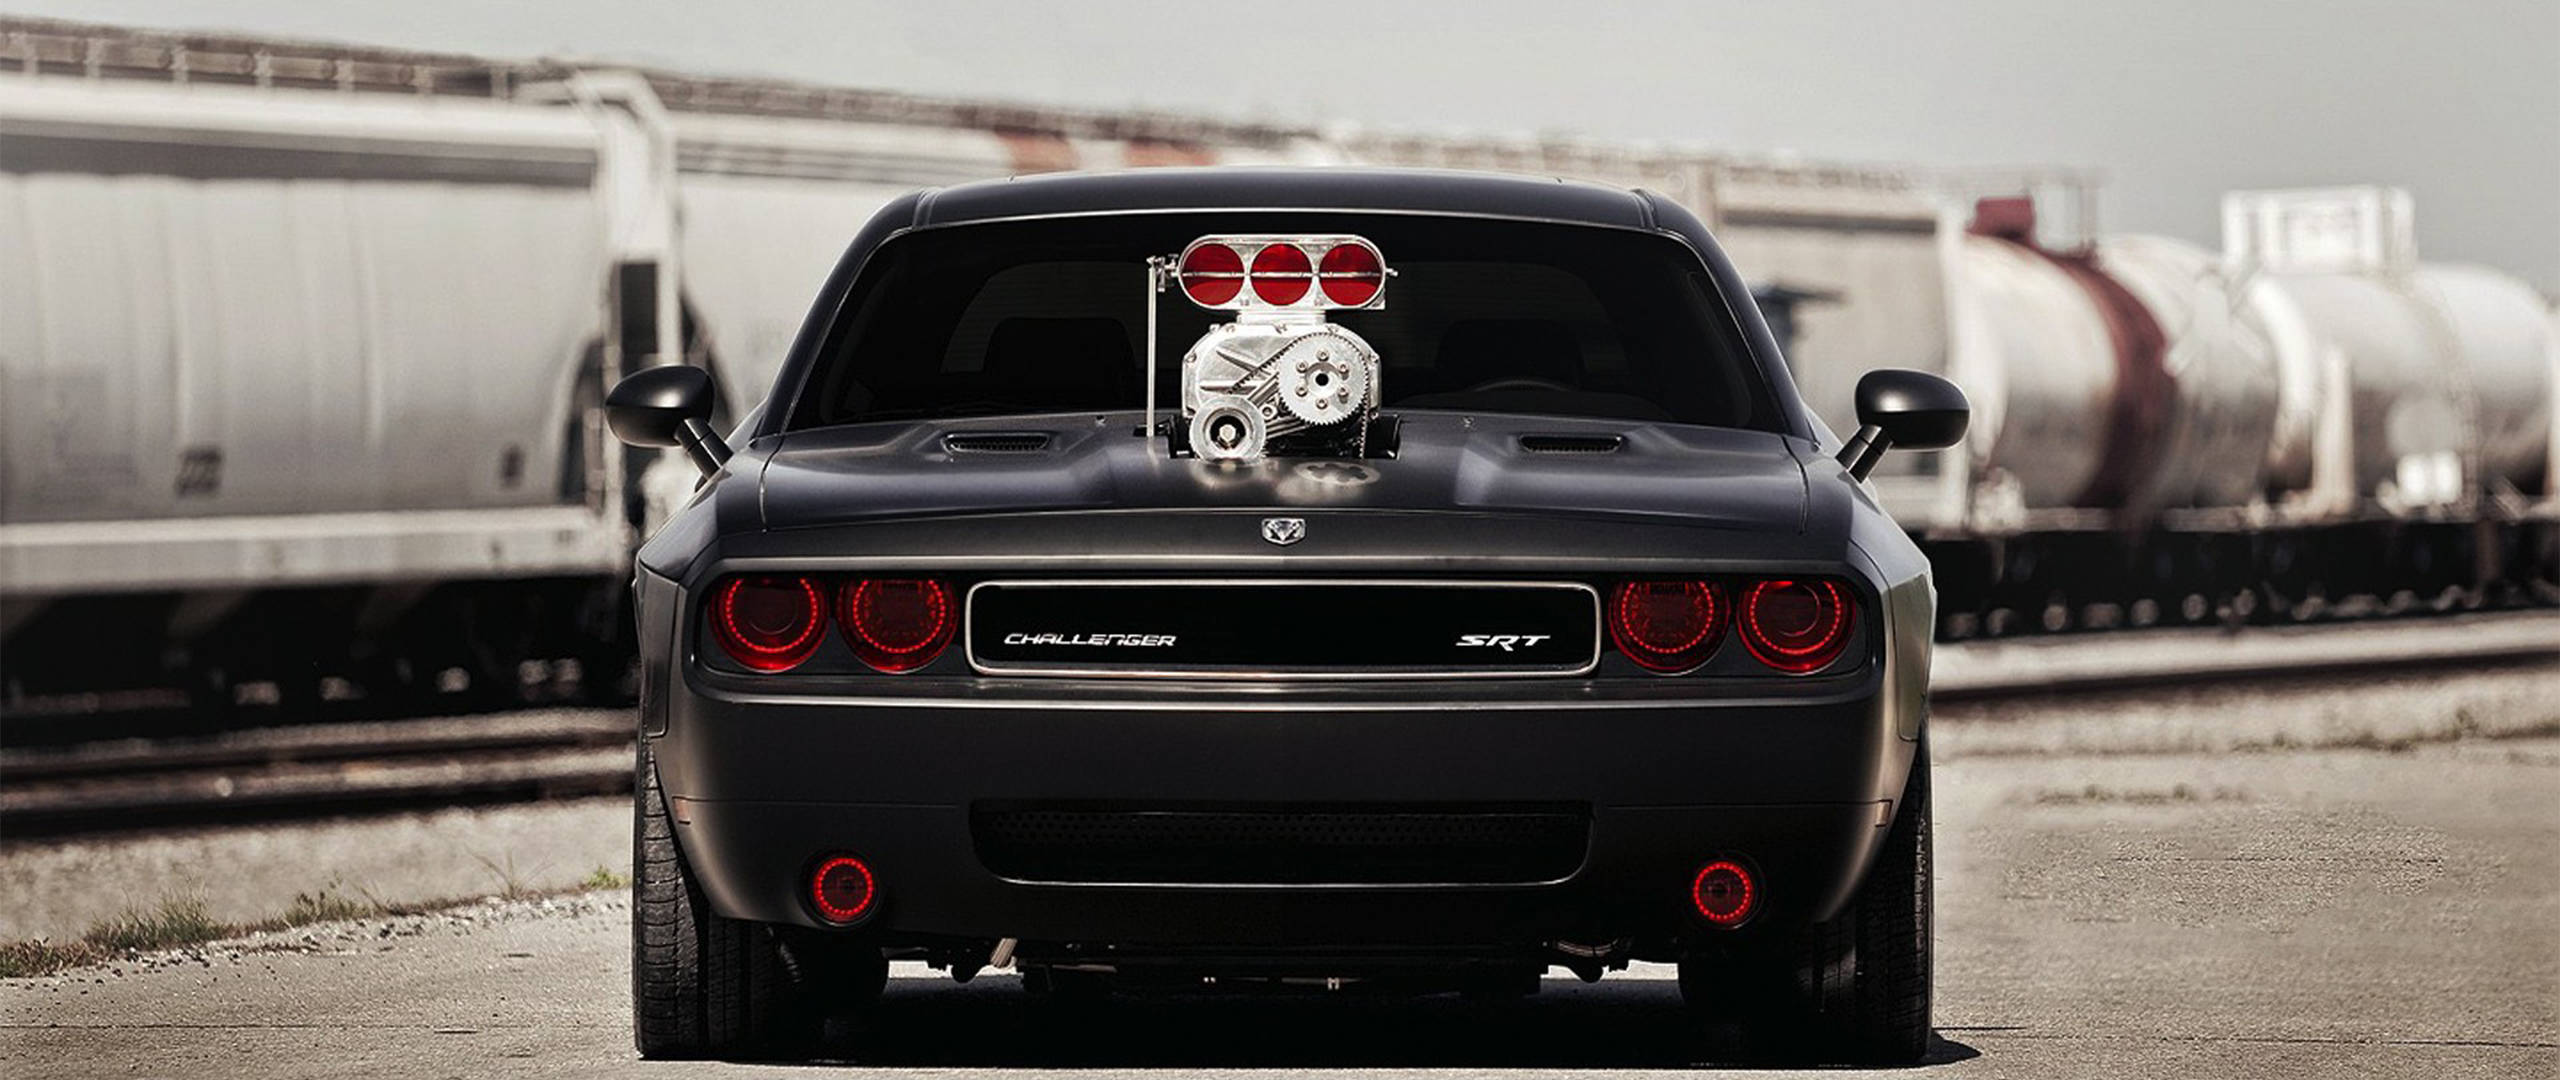 General 2560x1080 ultrawide car Dodge Dodge Challenger vehicle black cars muscle cars American cars Stellantis supercharger